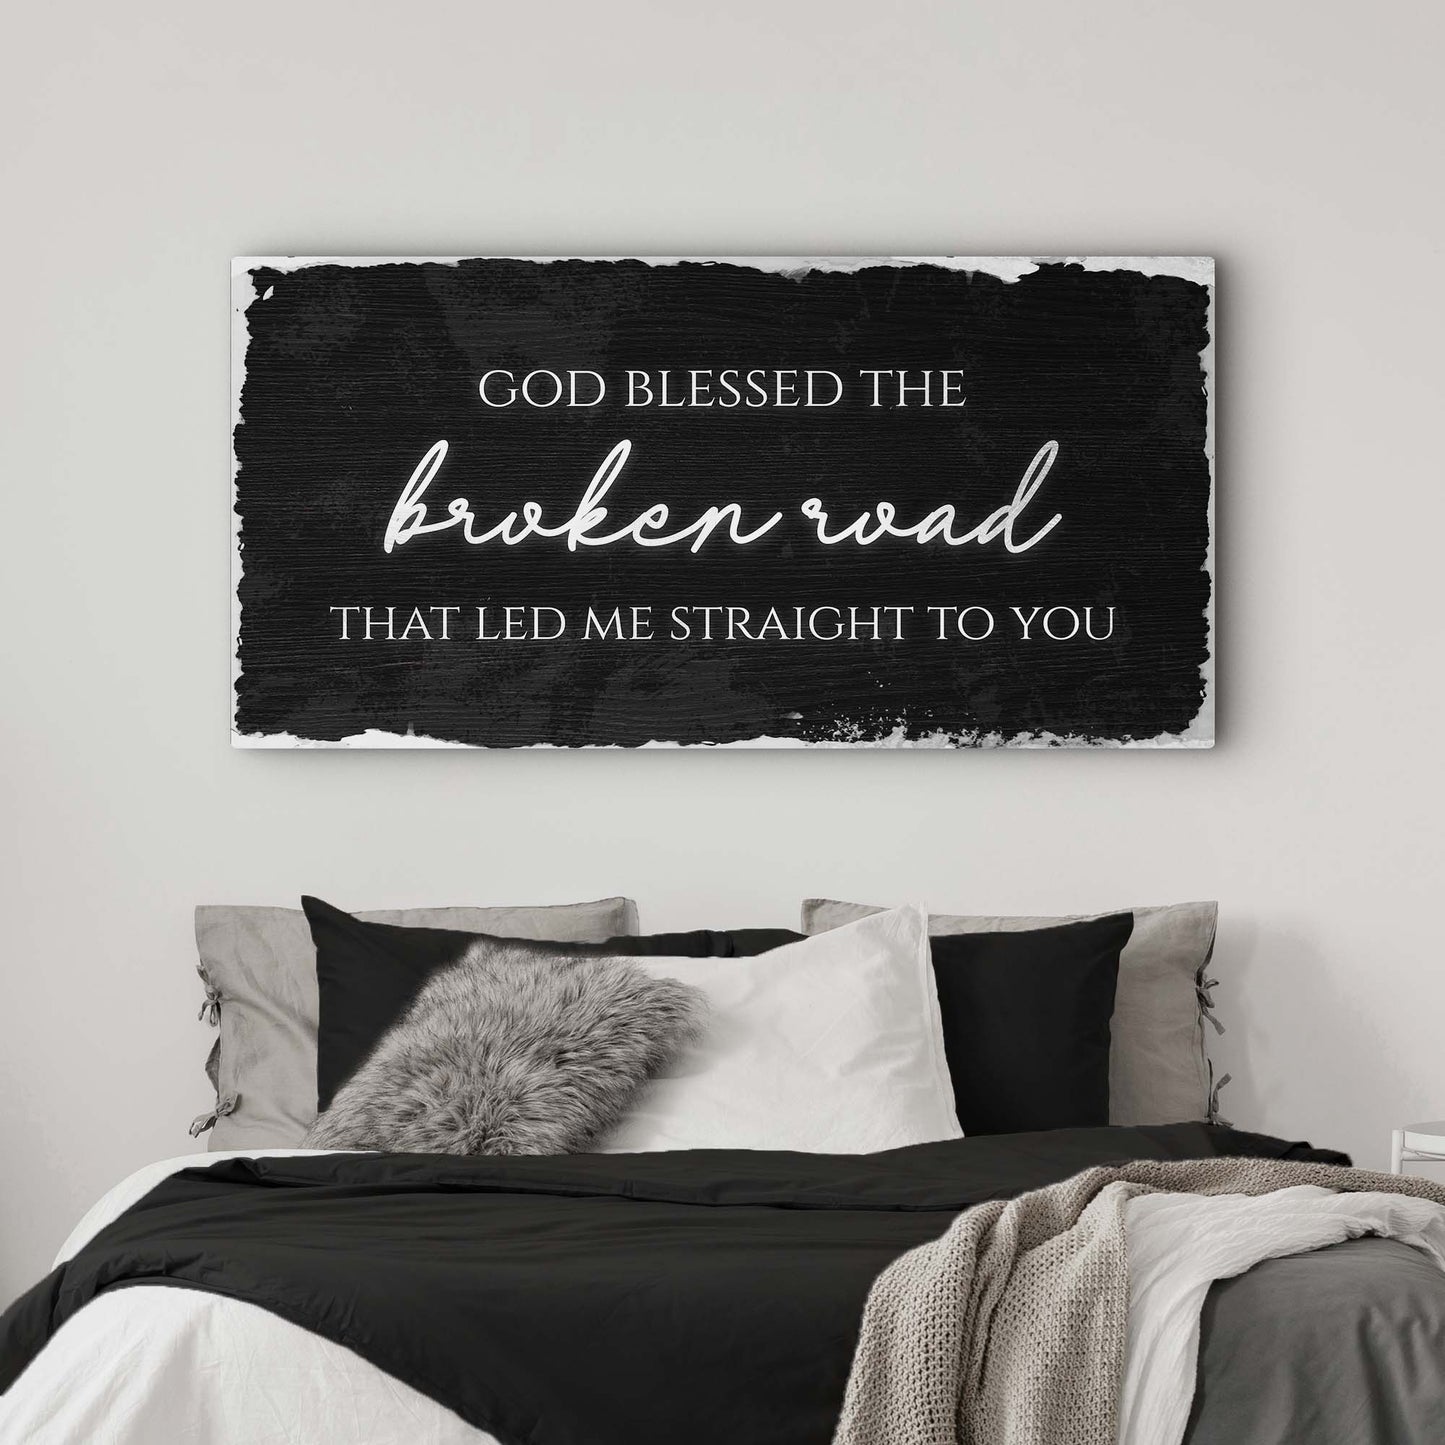 God Blessed The Broken Road Sign VI - Image by Tailored Canvases